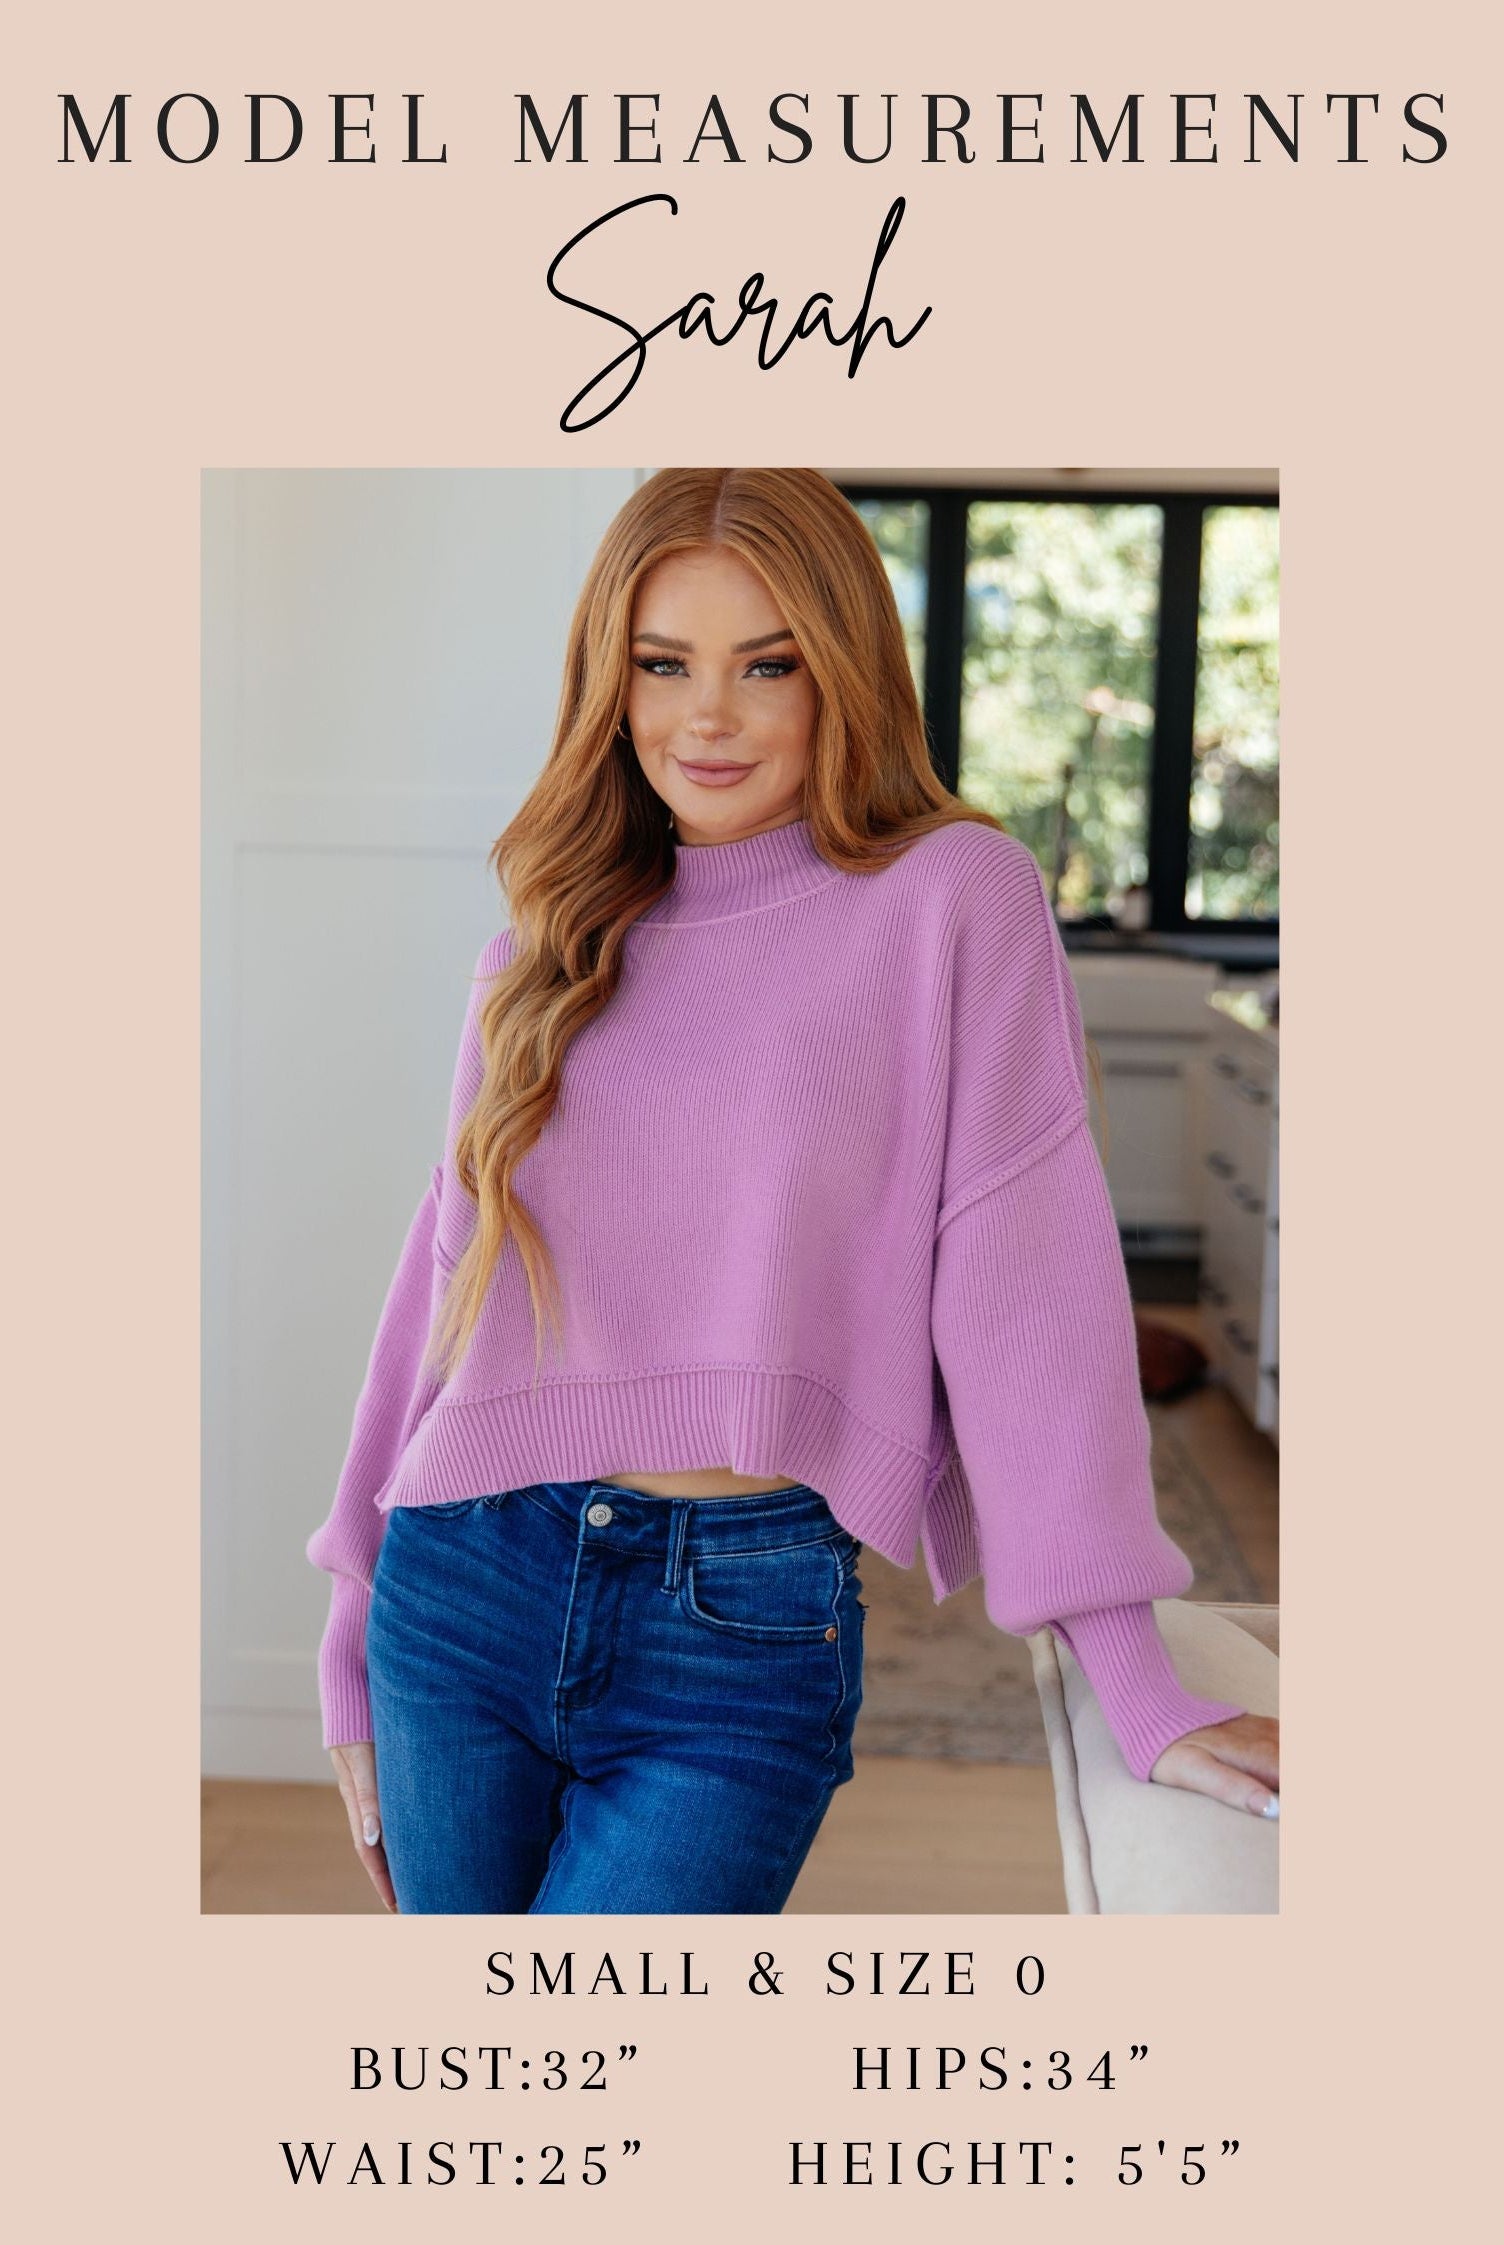 Handle That Half Zip Pullover-Outerwear- Simply Simpson's Boutique is a Women's Online Fashion Boutique Located in Jupiter, Florida